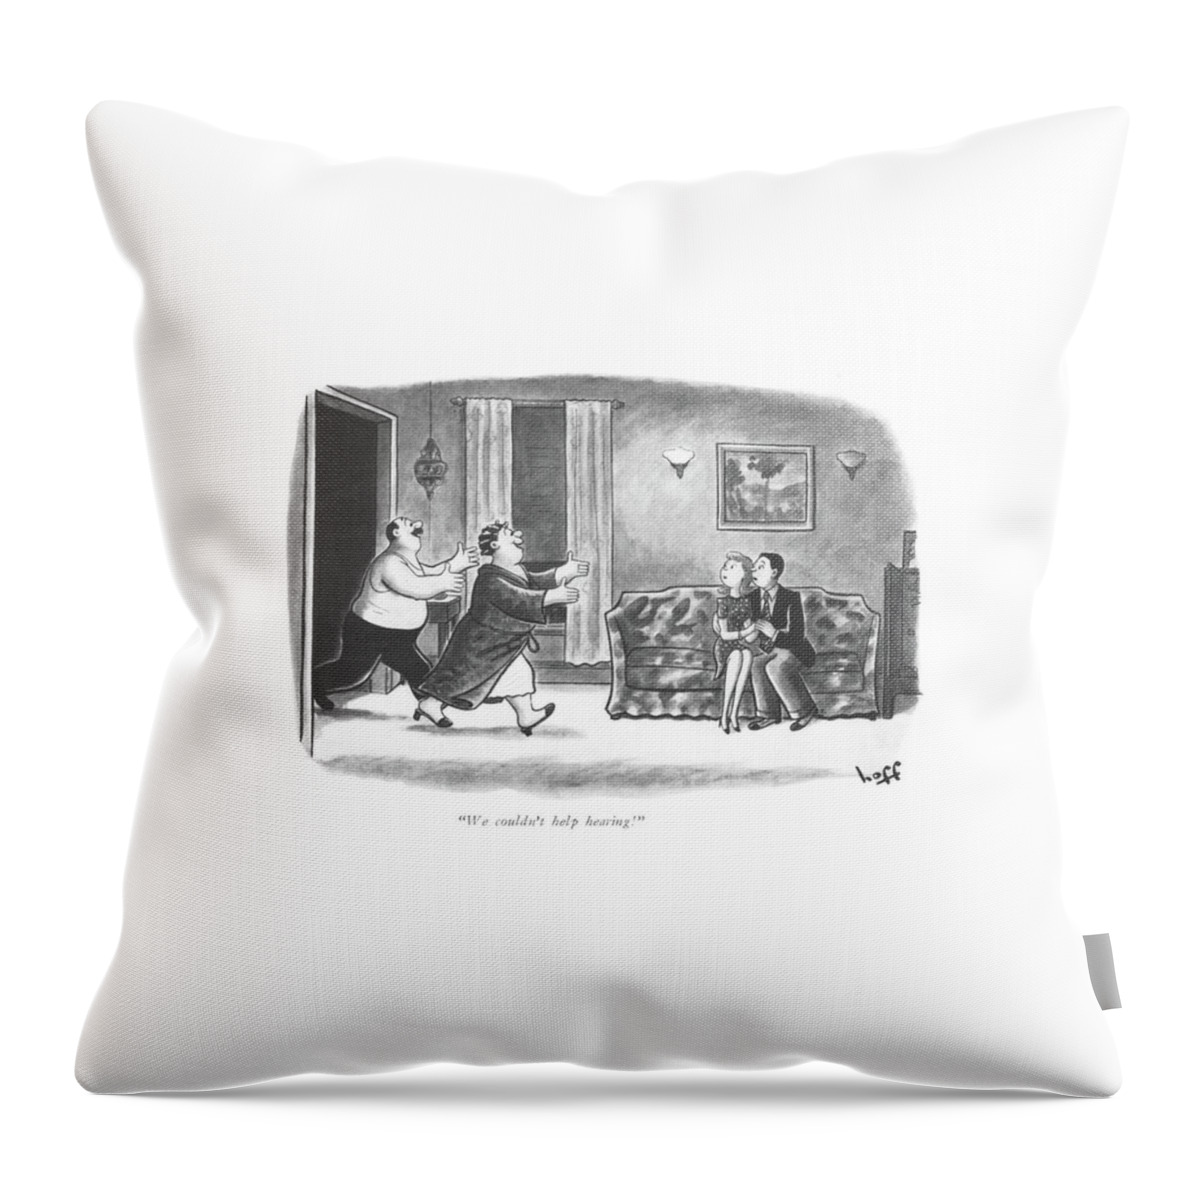 We Couldn't Help Hearing! Throw Pillow